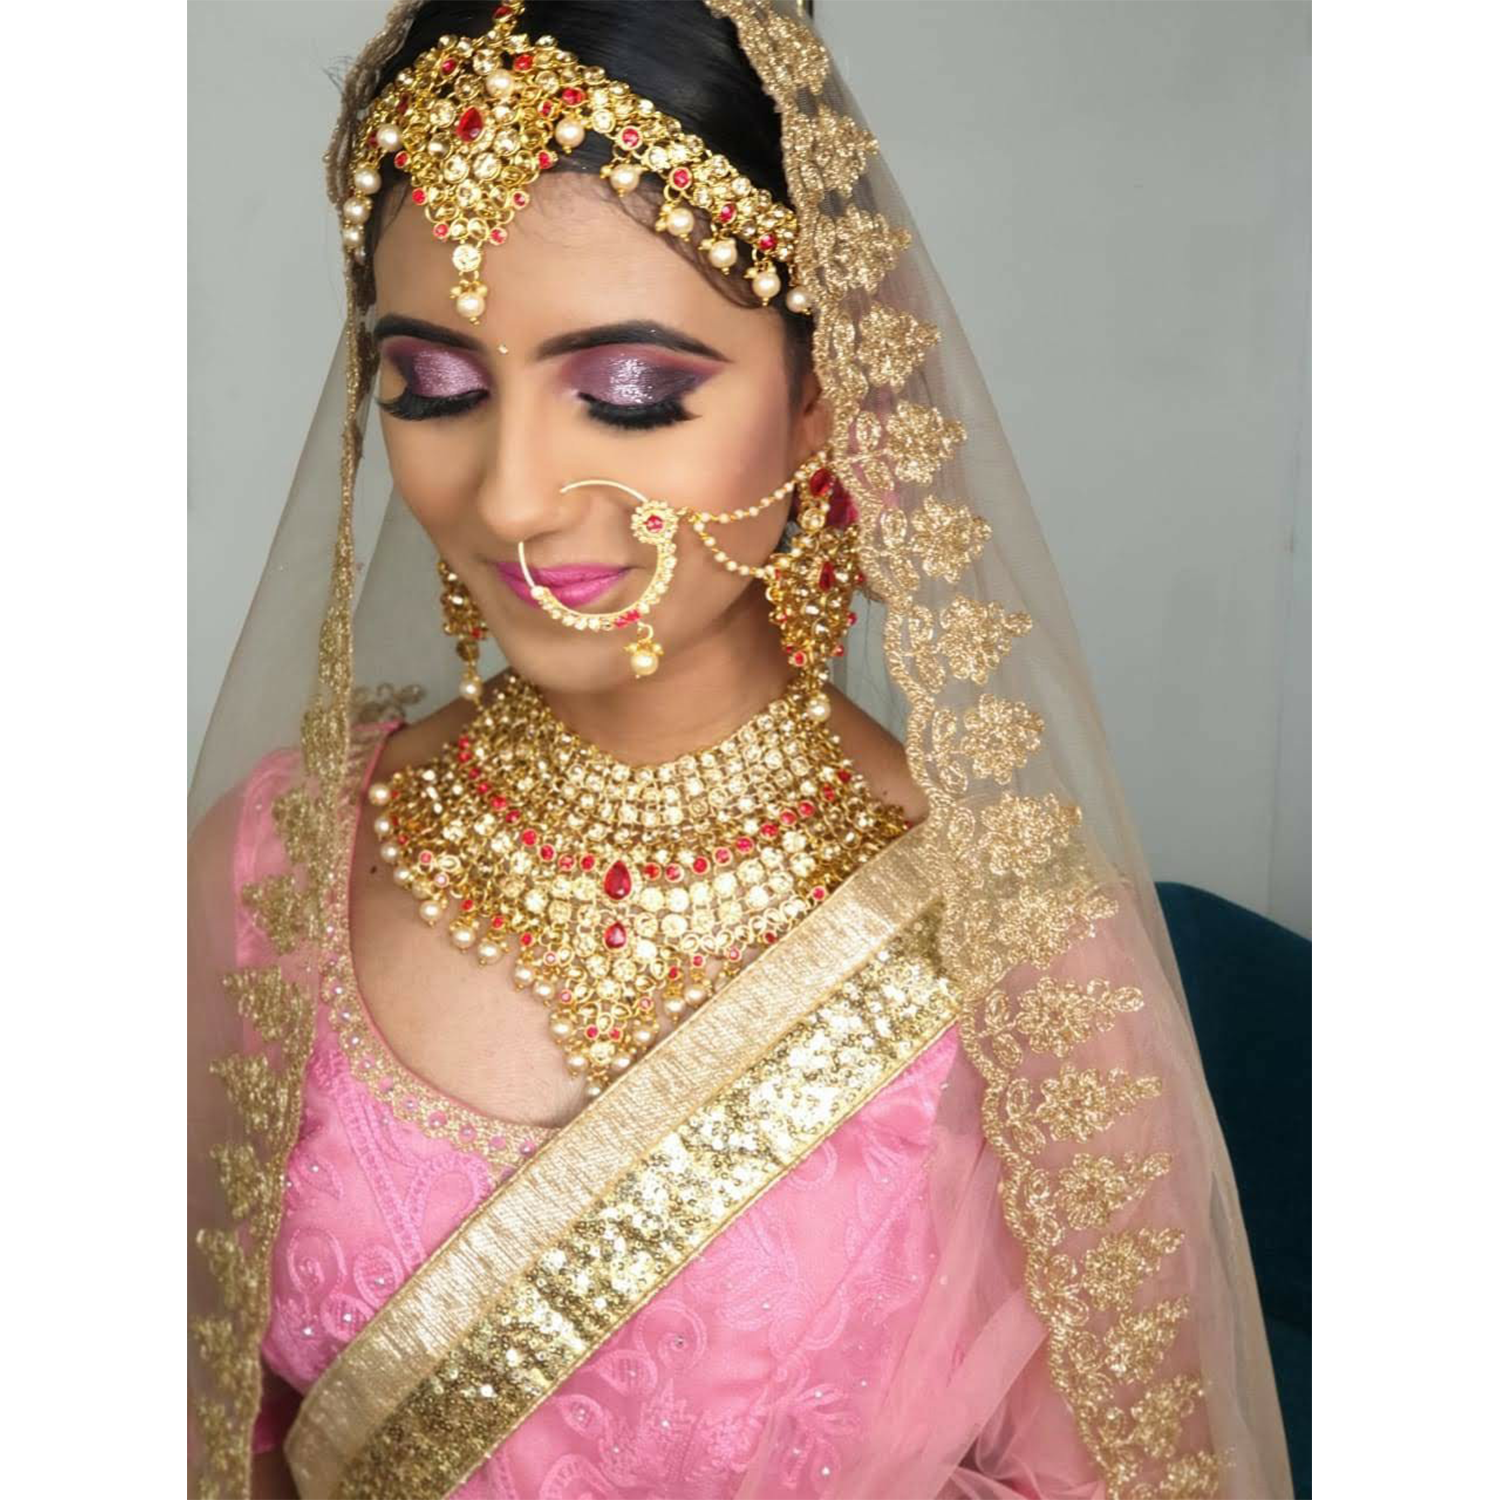 A Gorgeous Bride In Embroidered Pastel Pink Lehenga